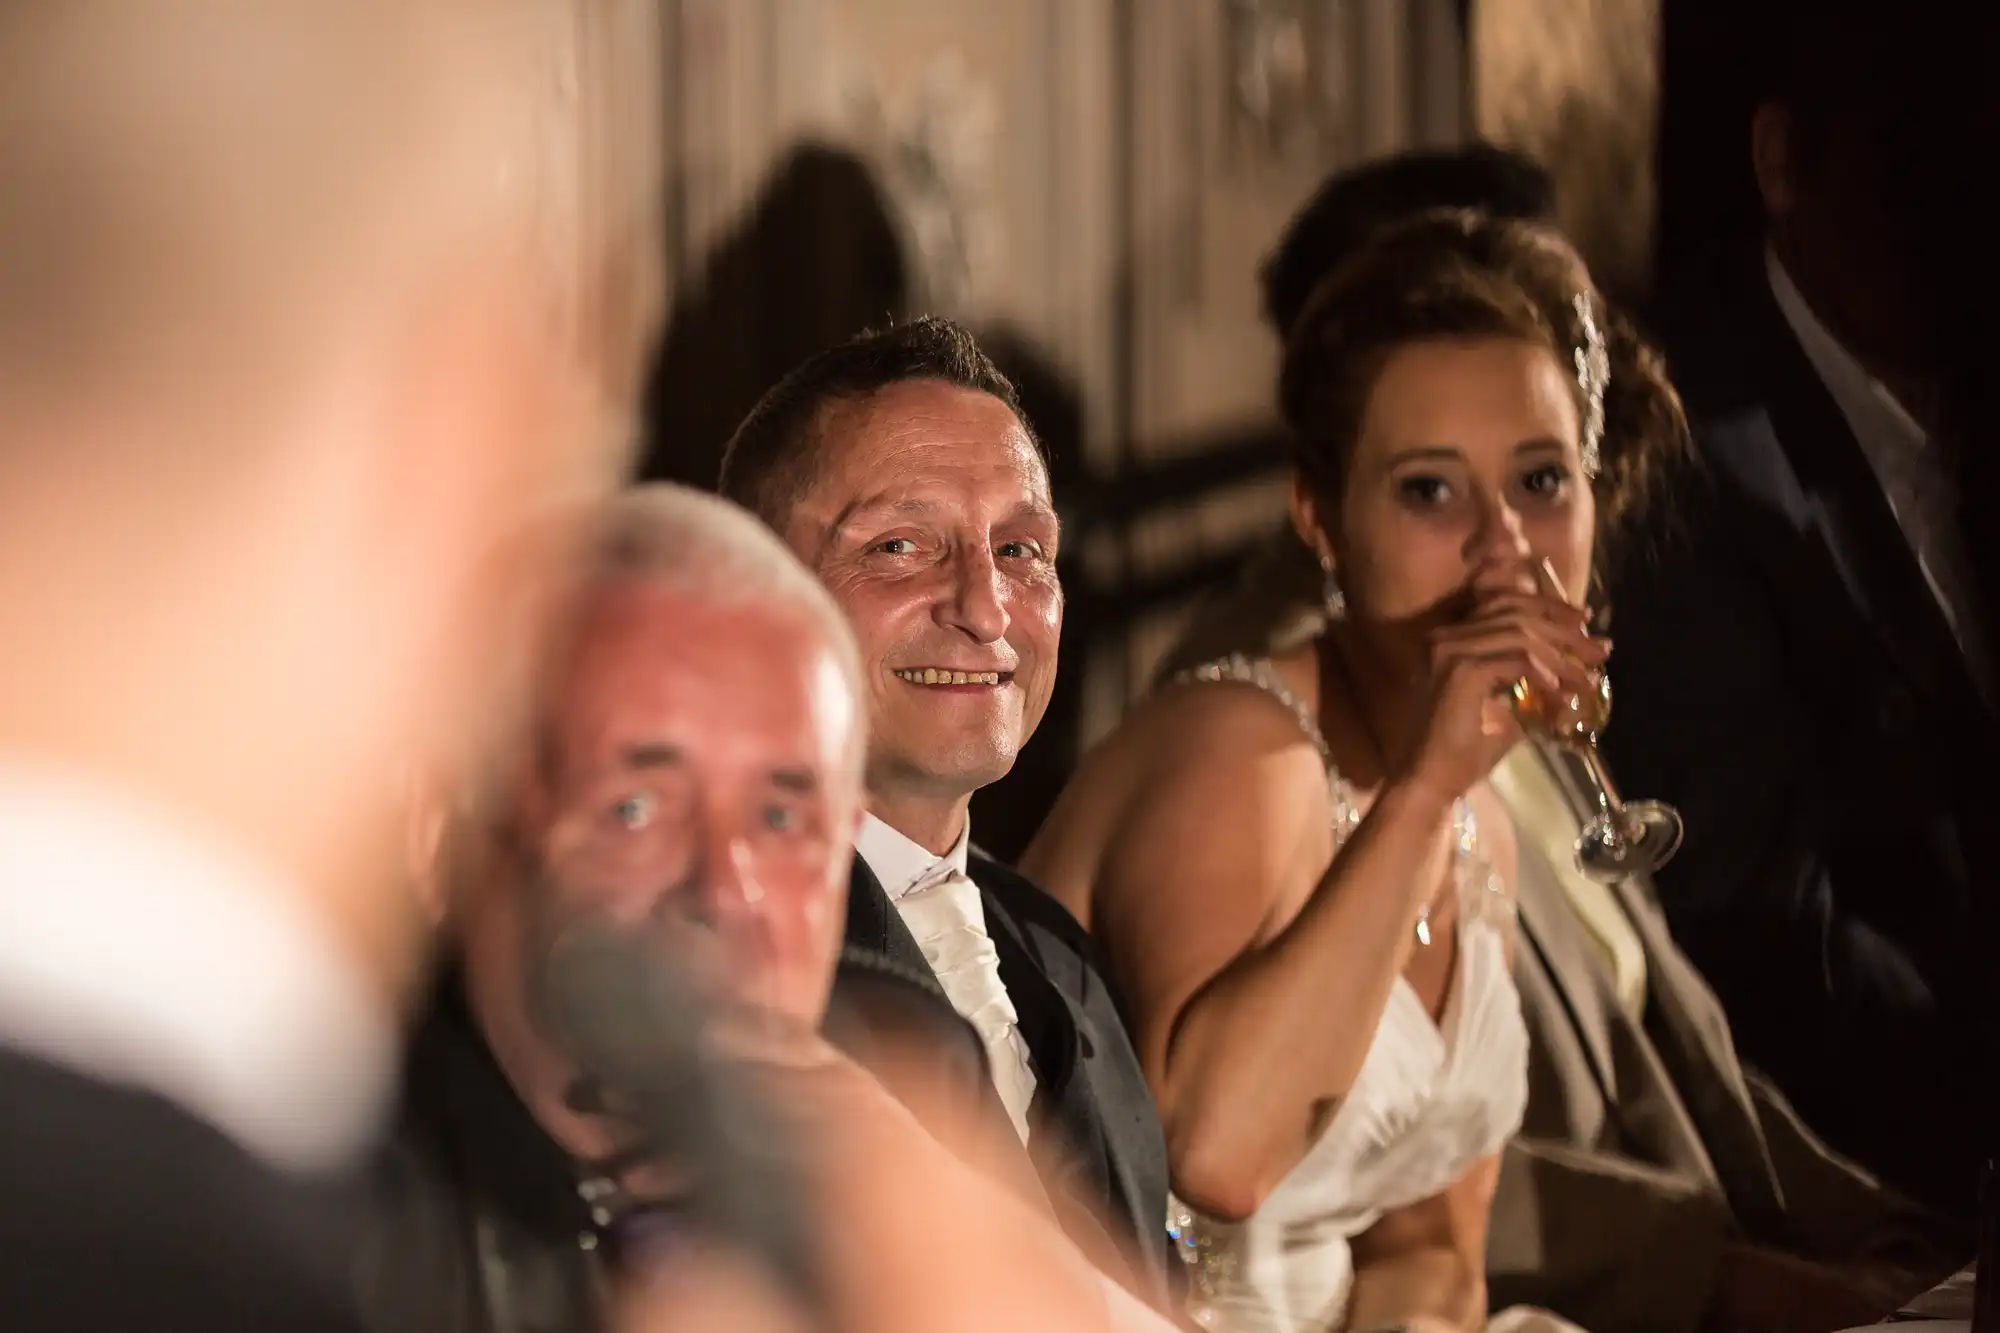 Man in a tuxedo smiling at a wedding reception, with other guests in foreground and beside him. focus is on the man in the center.